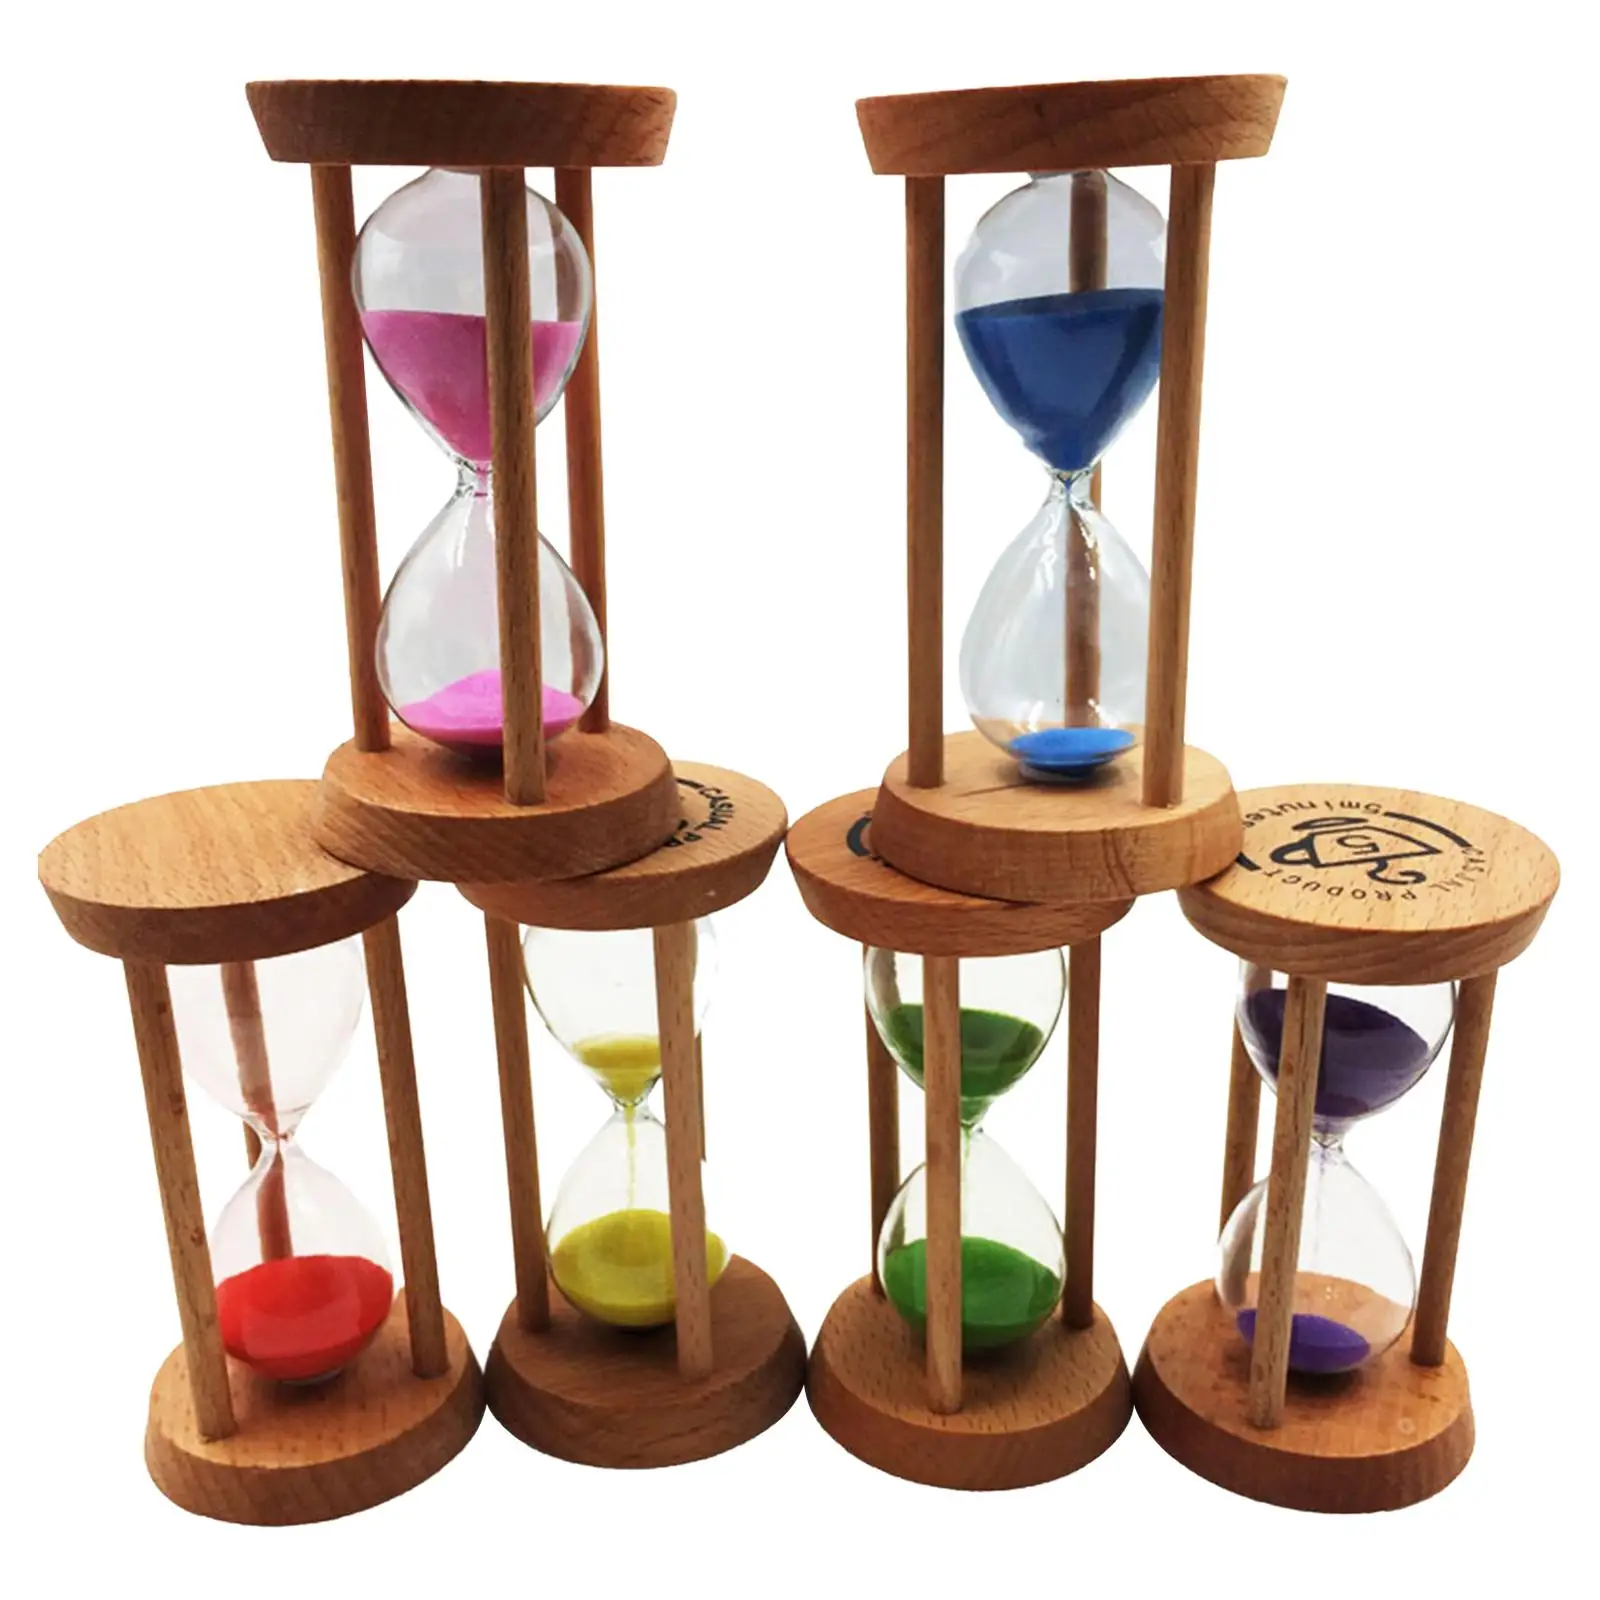 6Pcs Sand Timer Wood Hourglass Timer Sandglass Timer for Games Studying